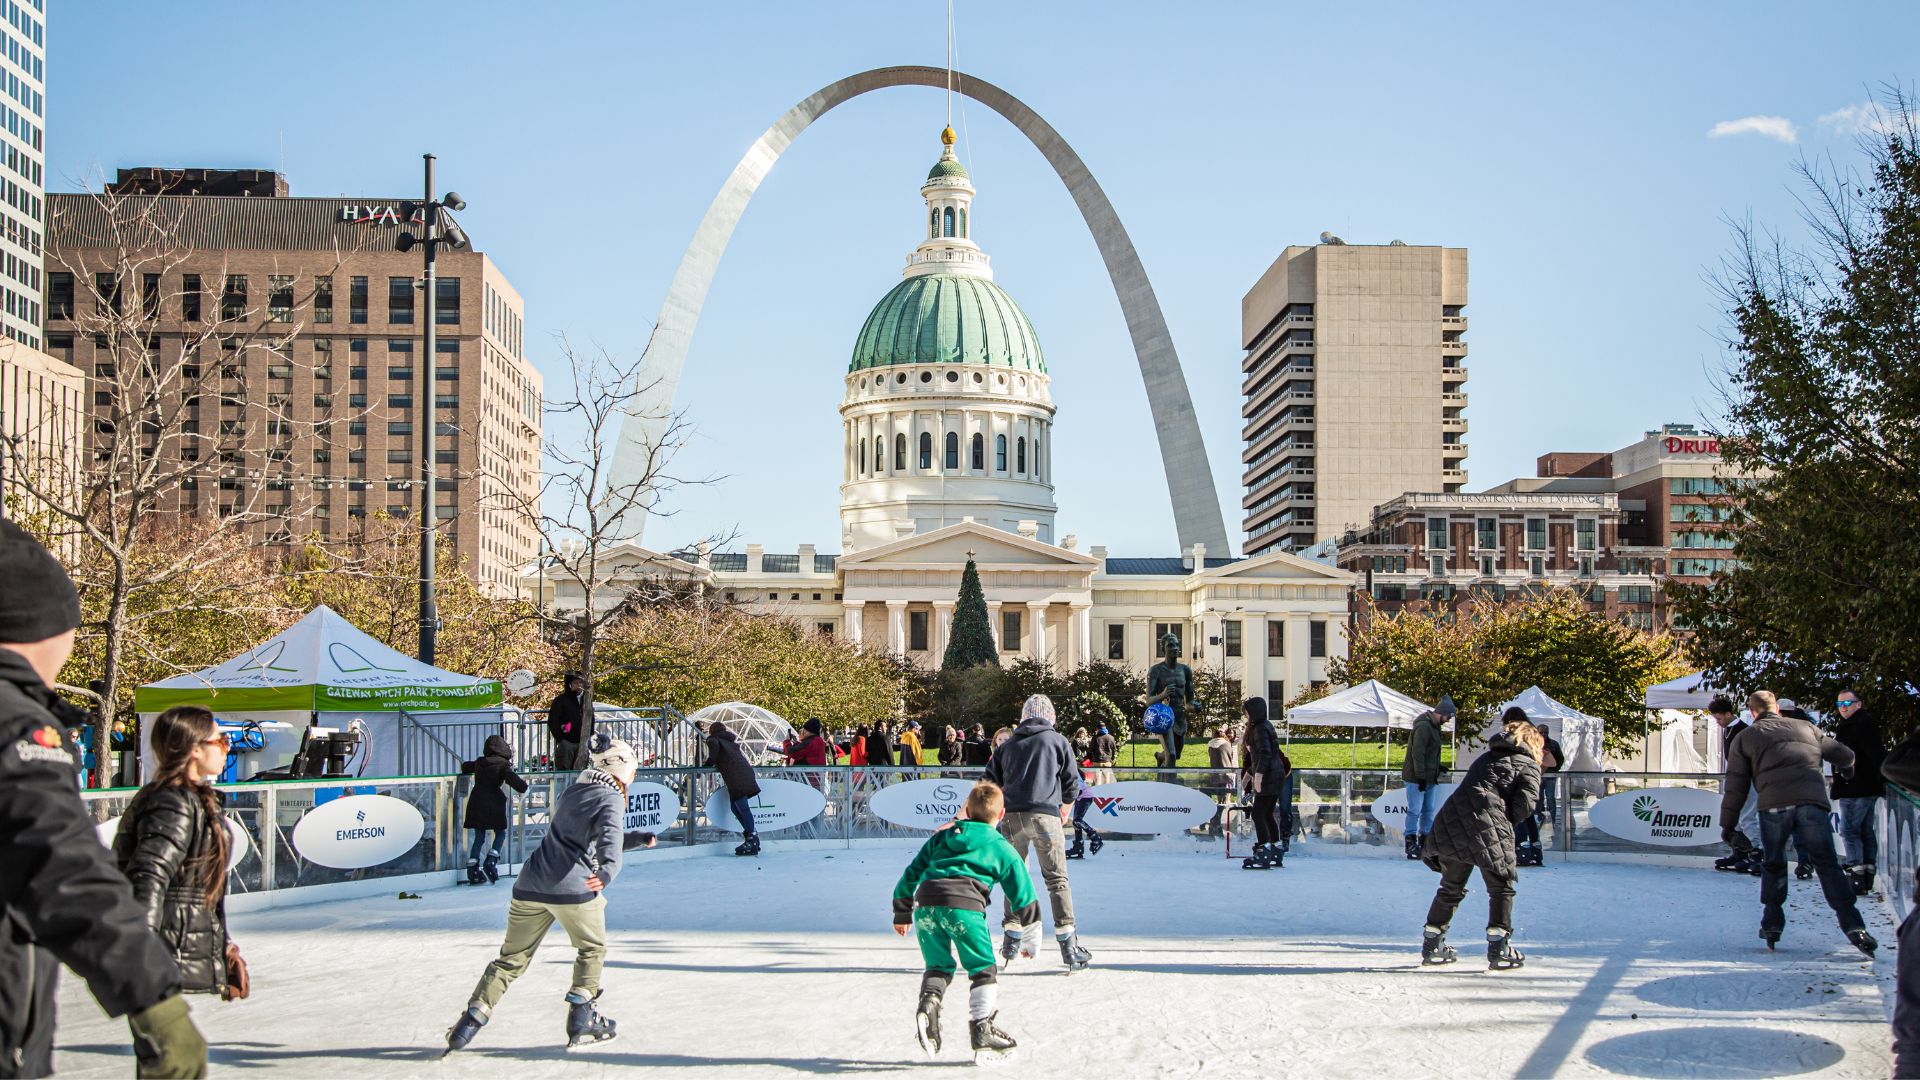 People of all ages ice skate at Winterfest in downtown St. Louis.